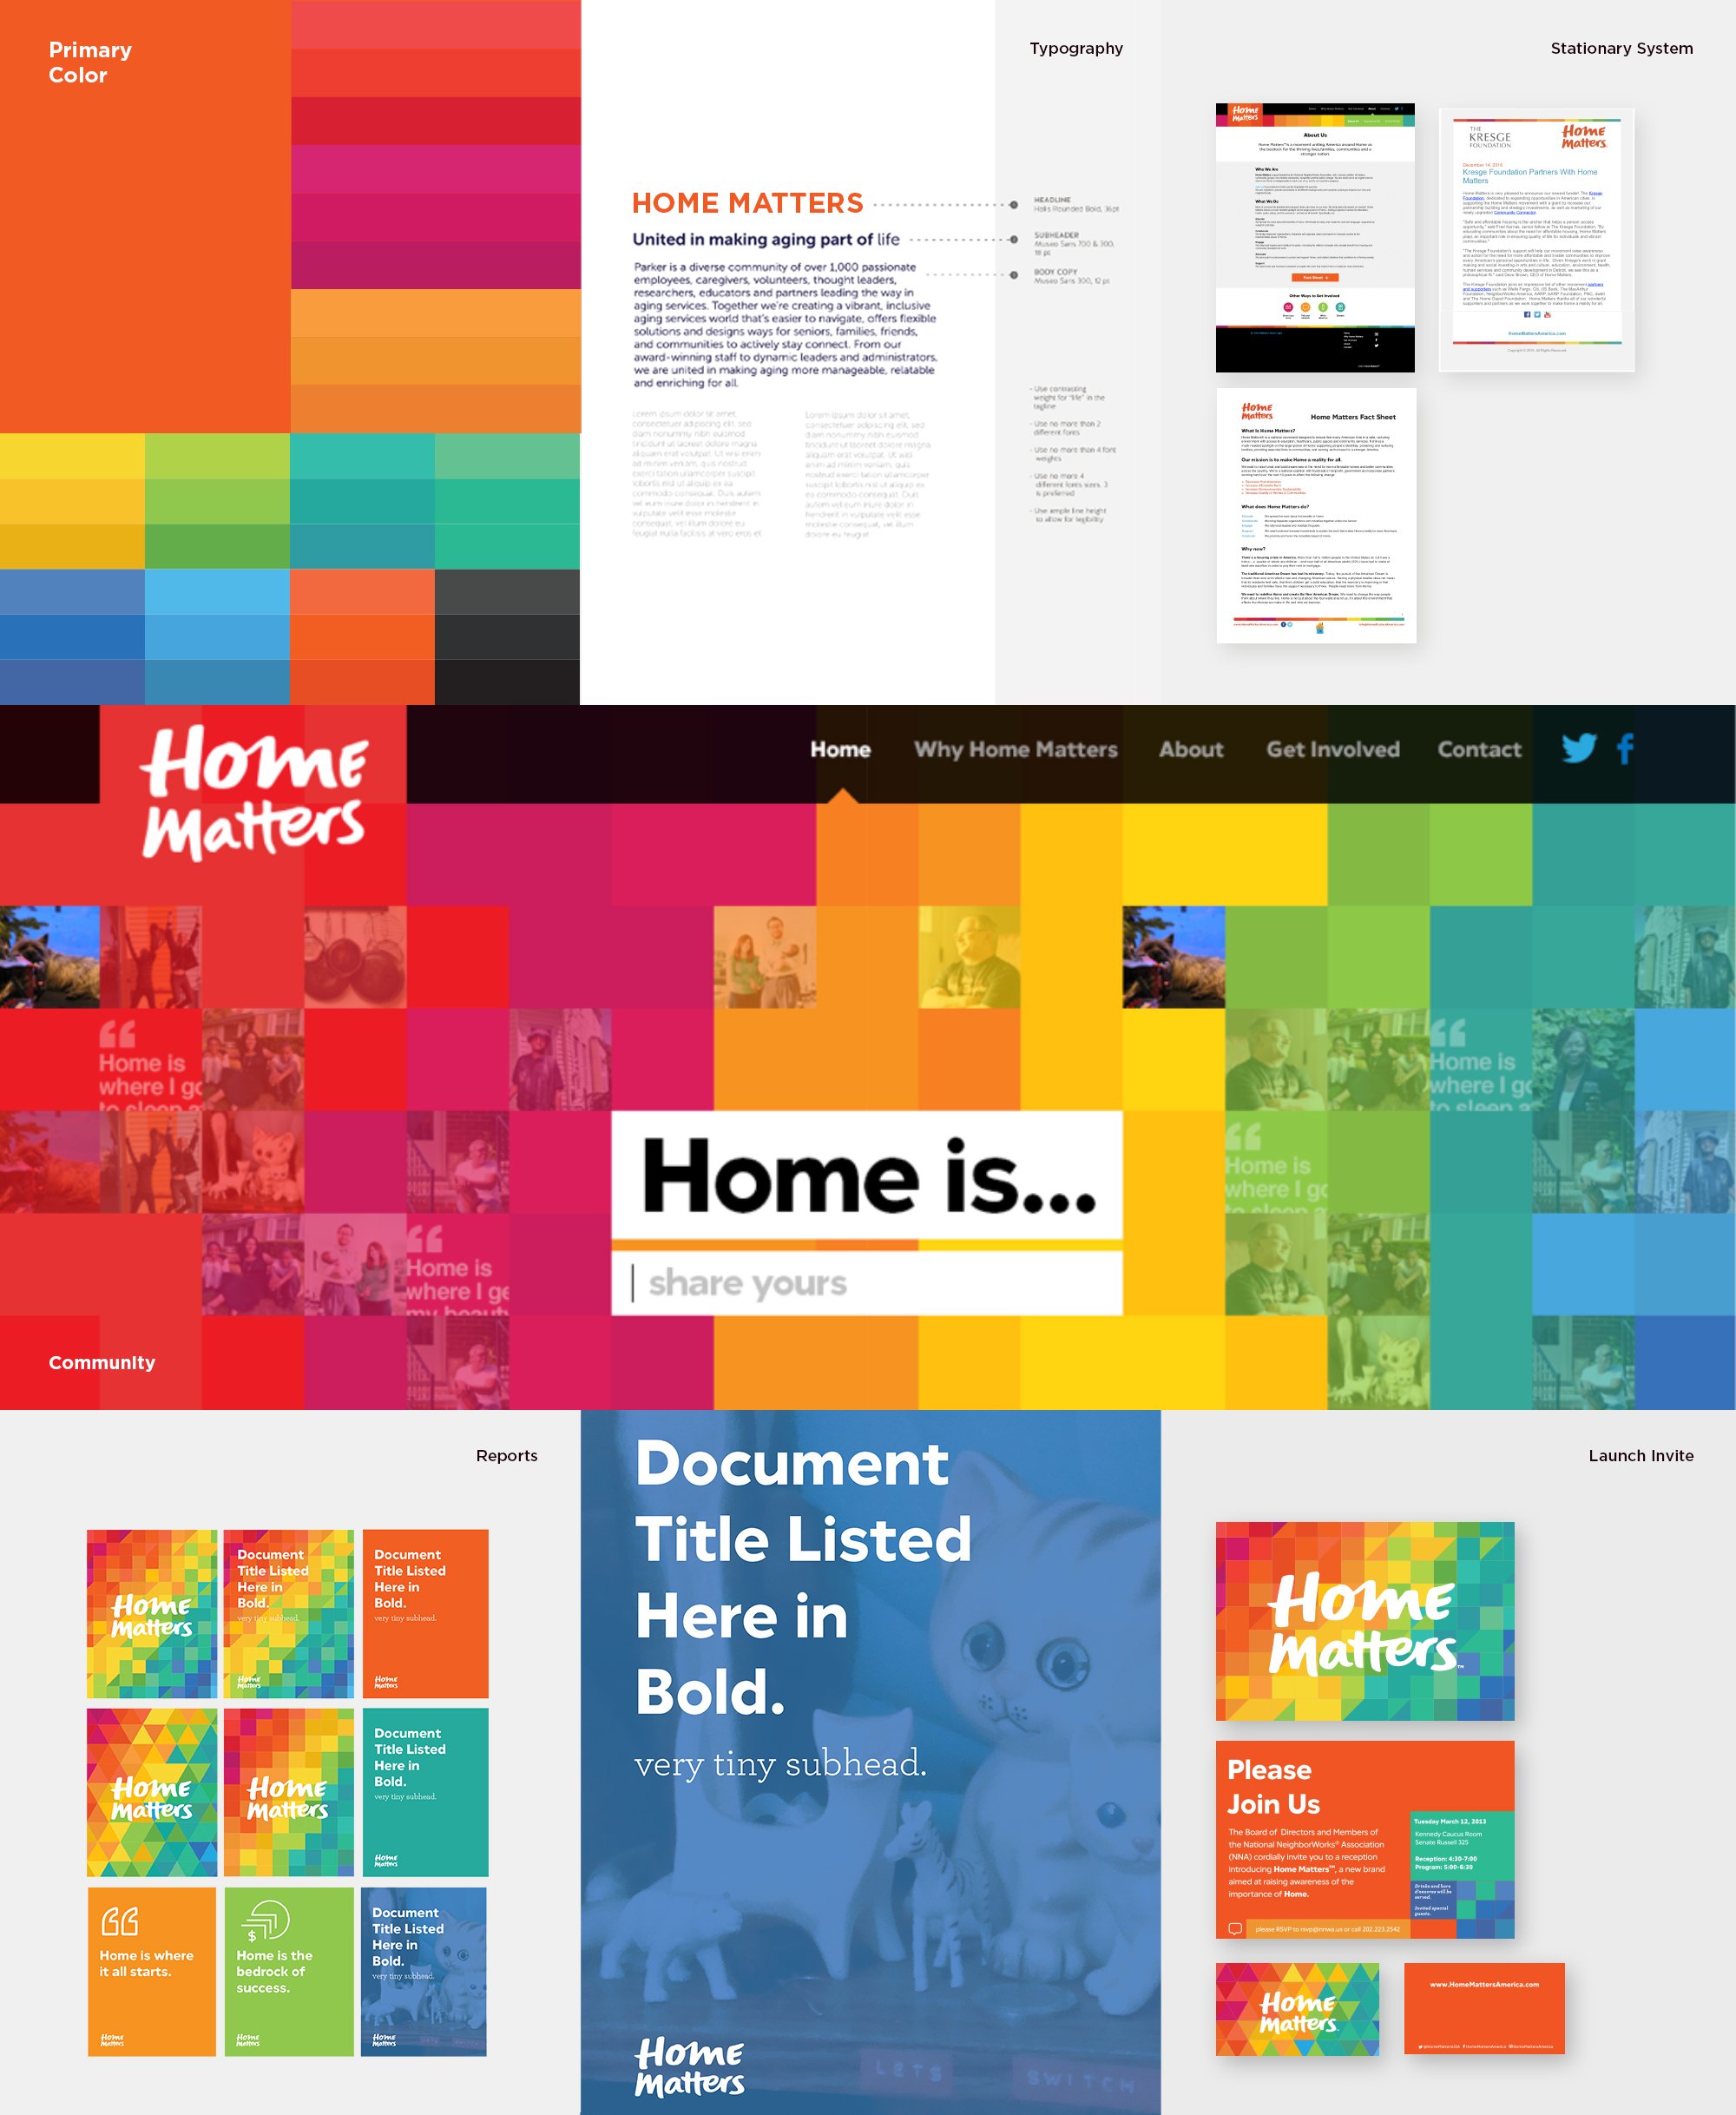 Home Matters brand guidelines